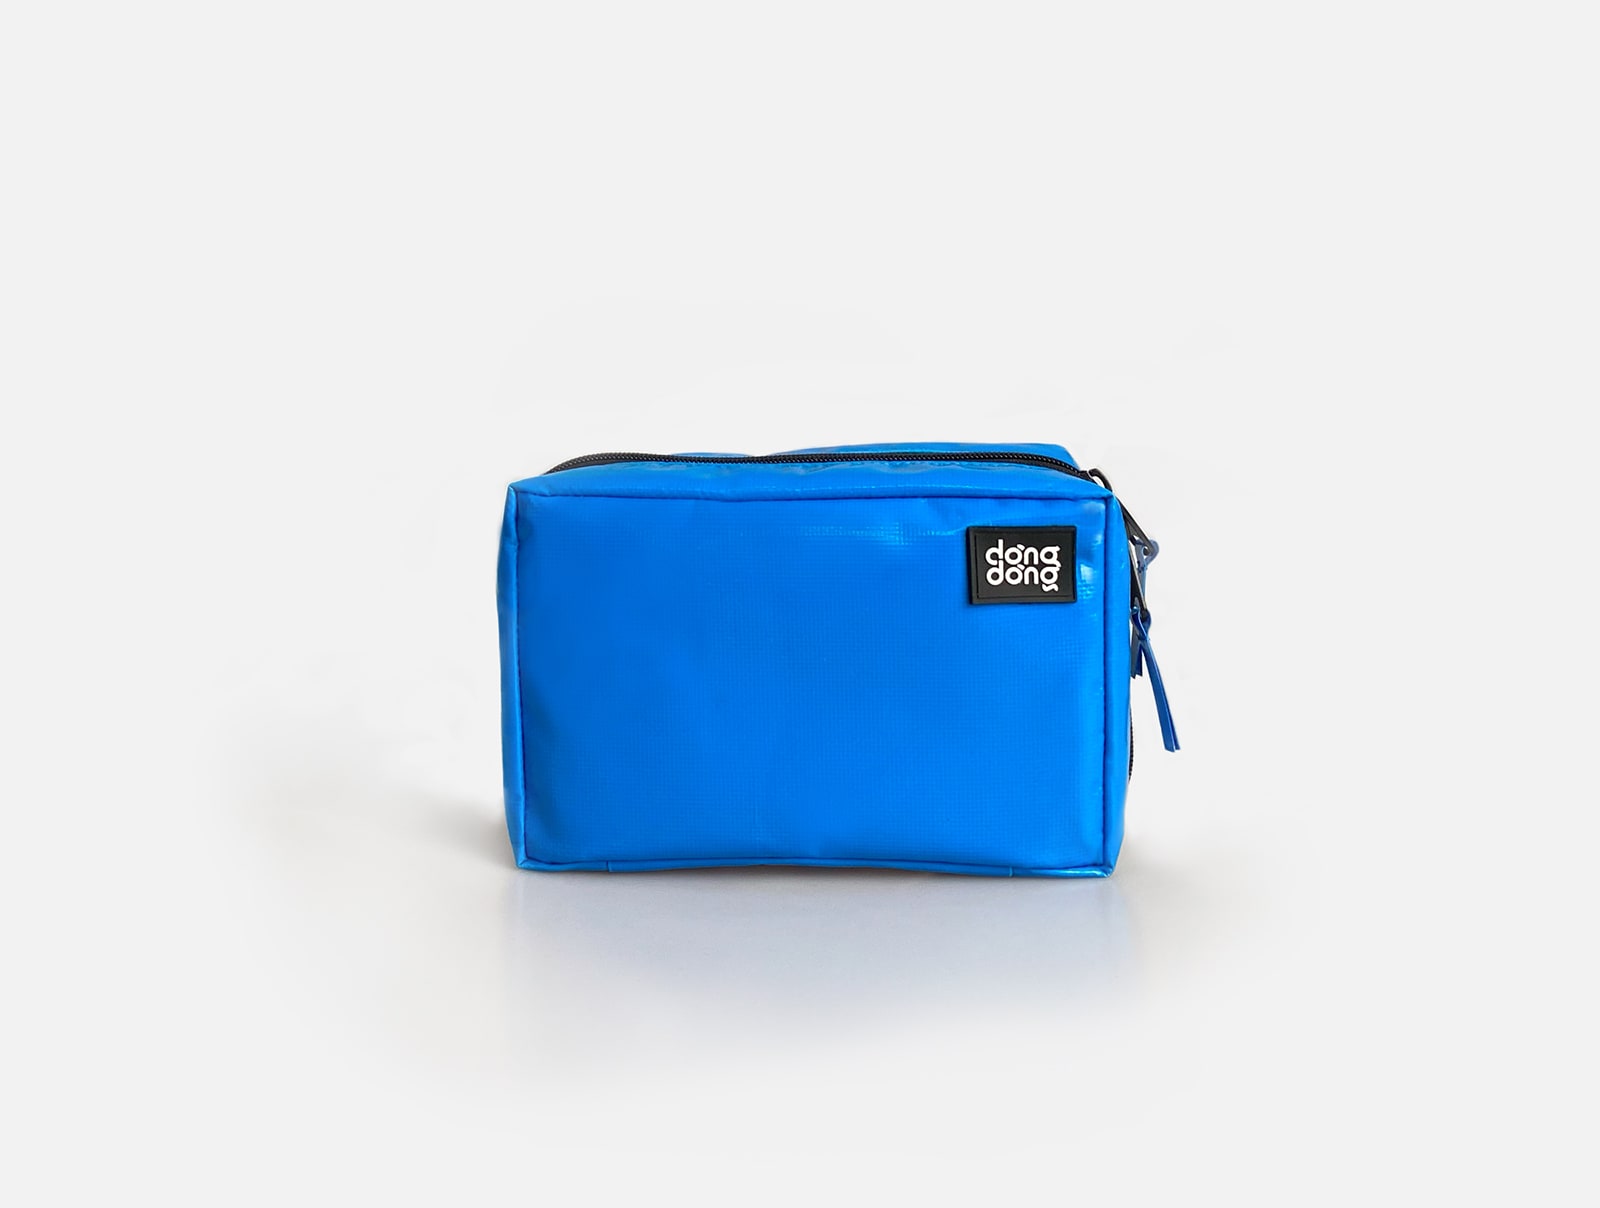 selection of toiletry bags in different colors and styles